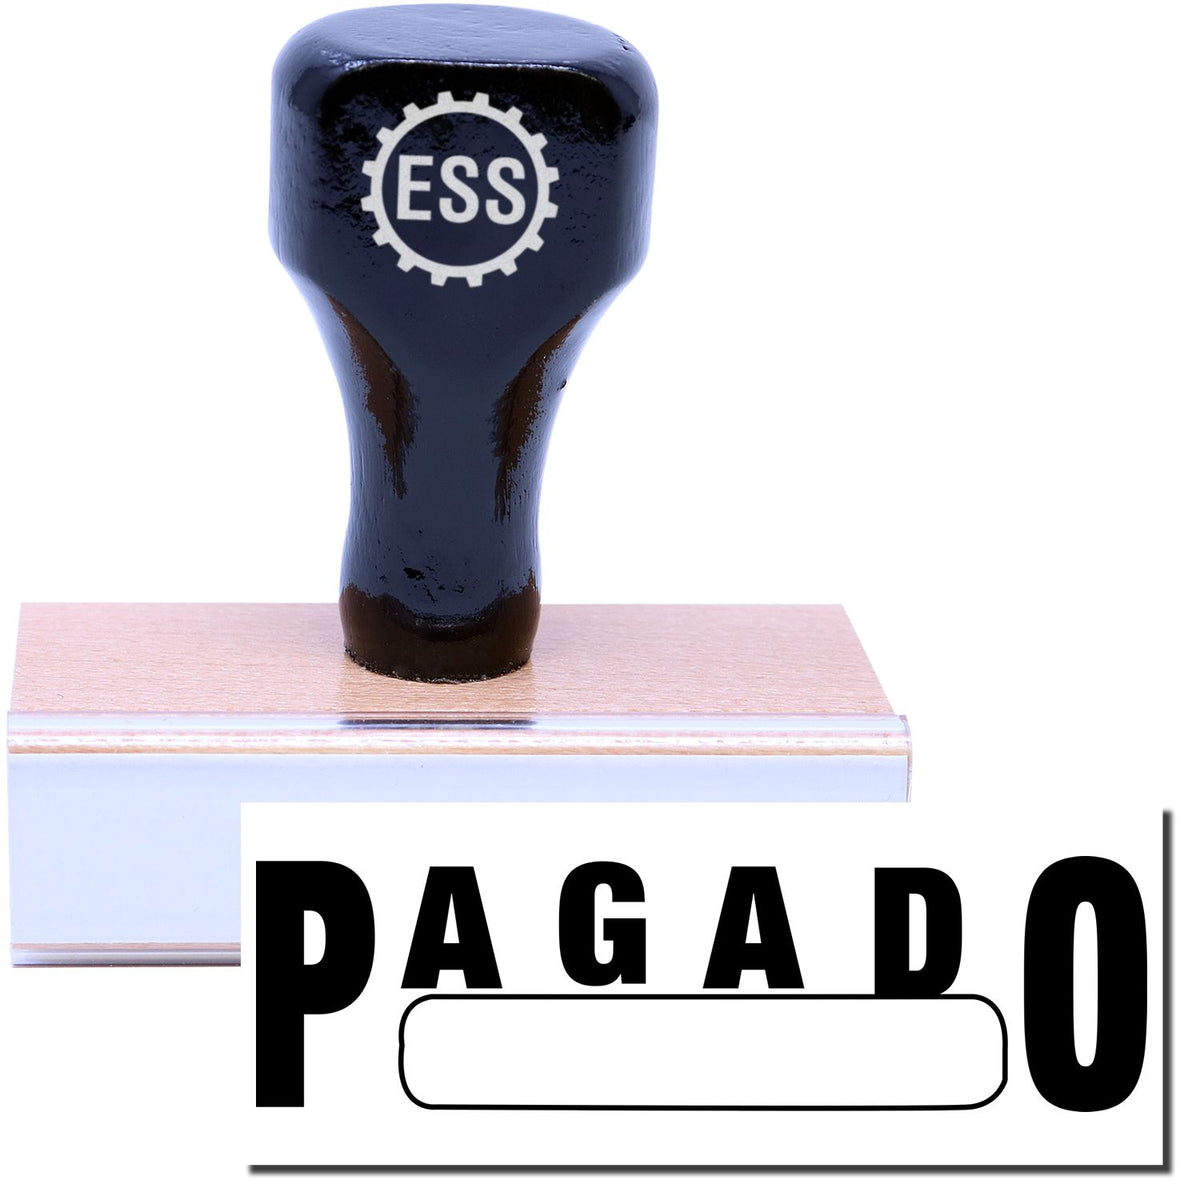 A stock office rubber stamp with a stamped image showing how the text &quot;PAGADO&quot; in a large font with a box is displayed after stamping.